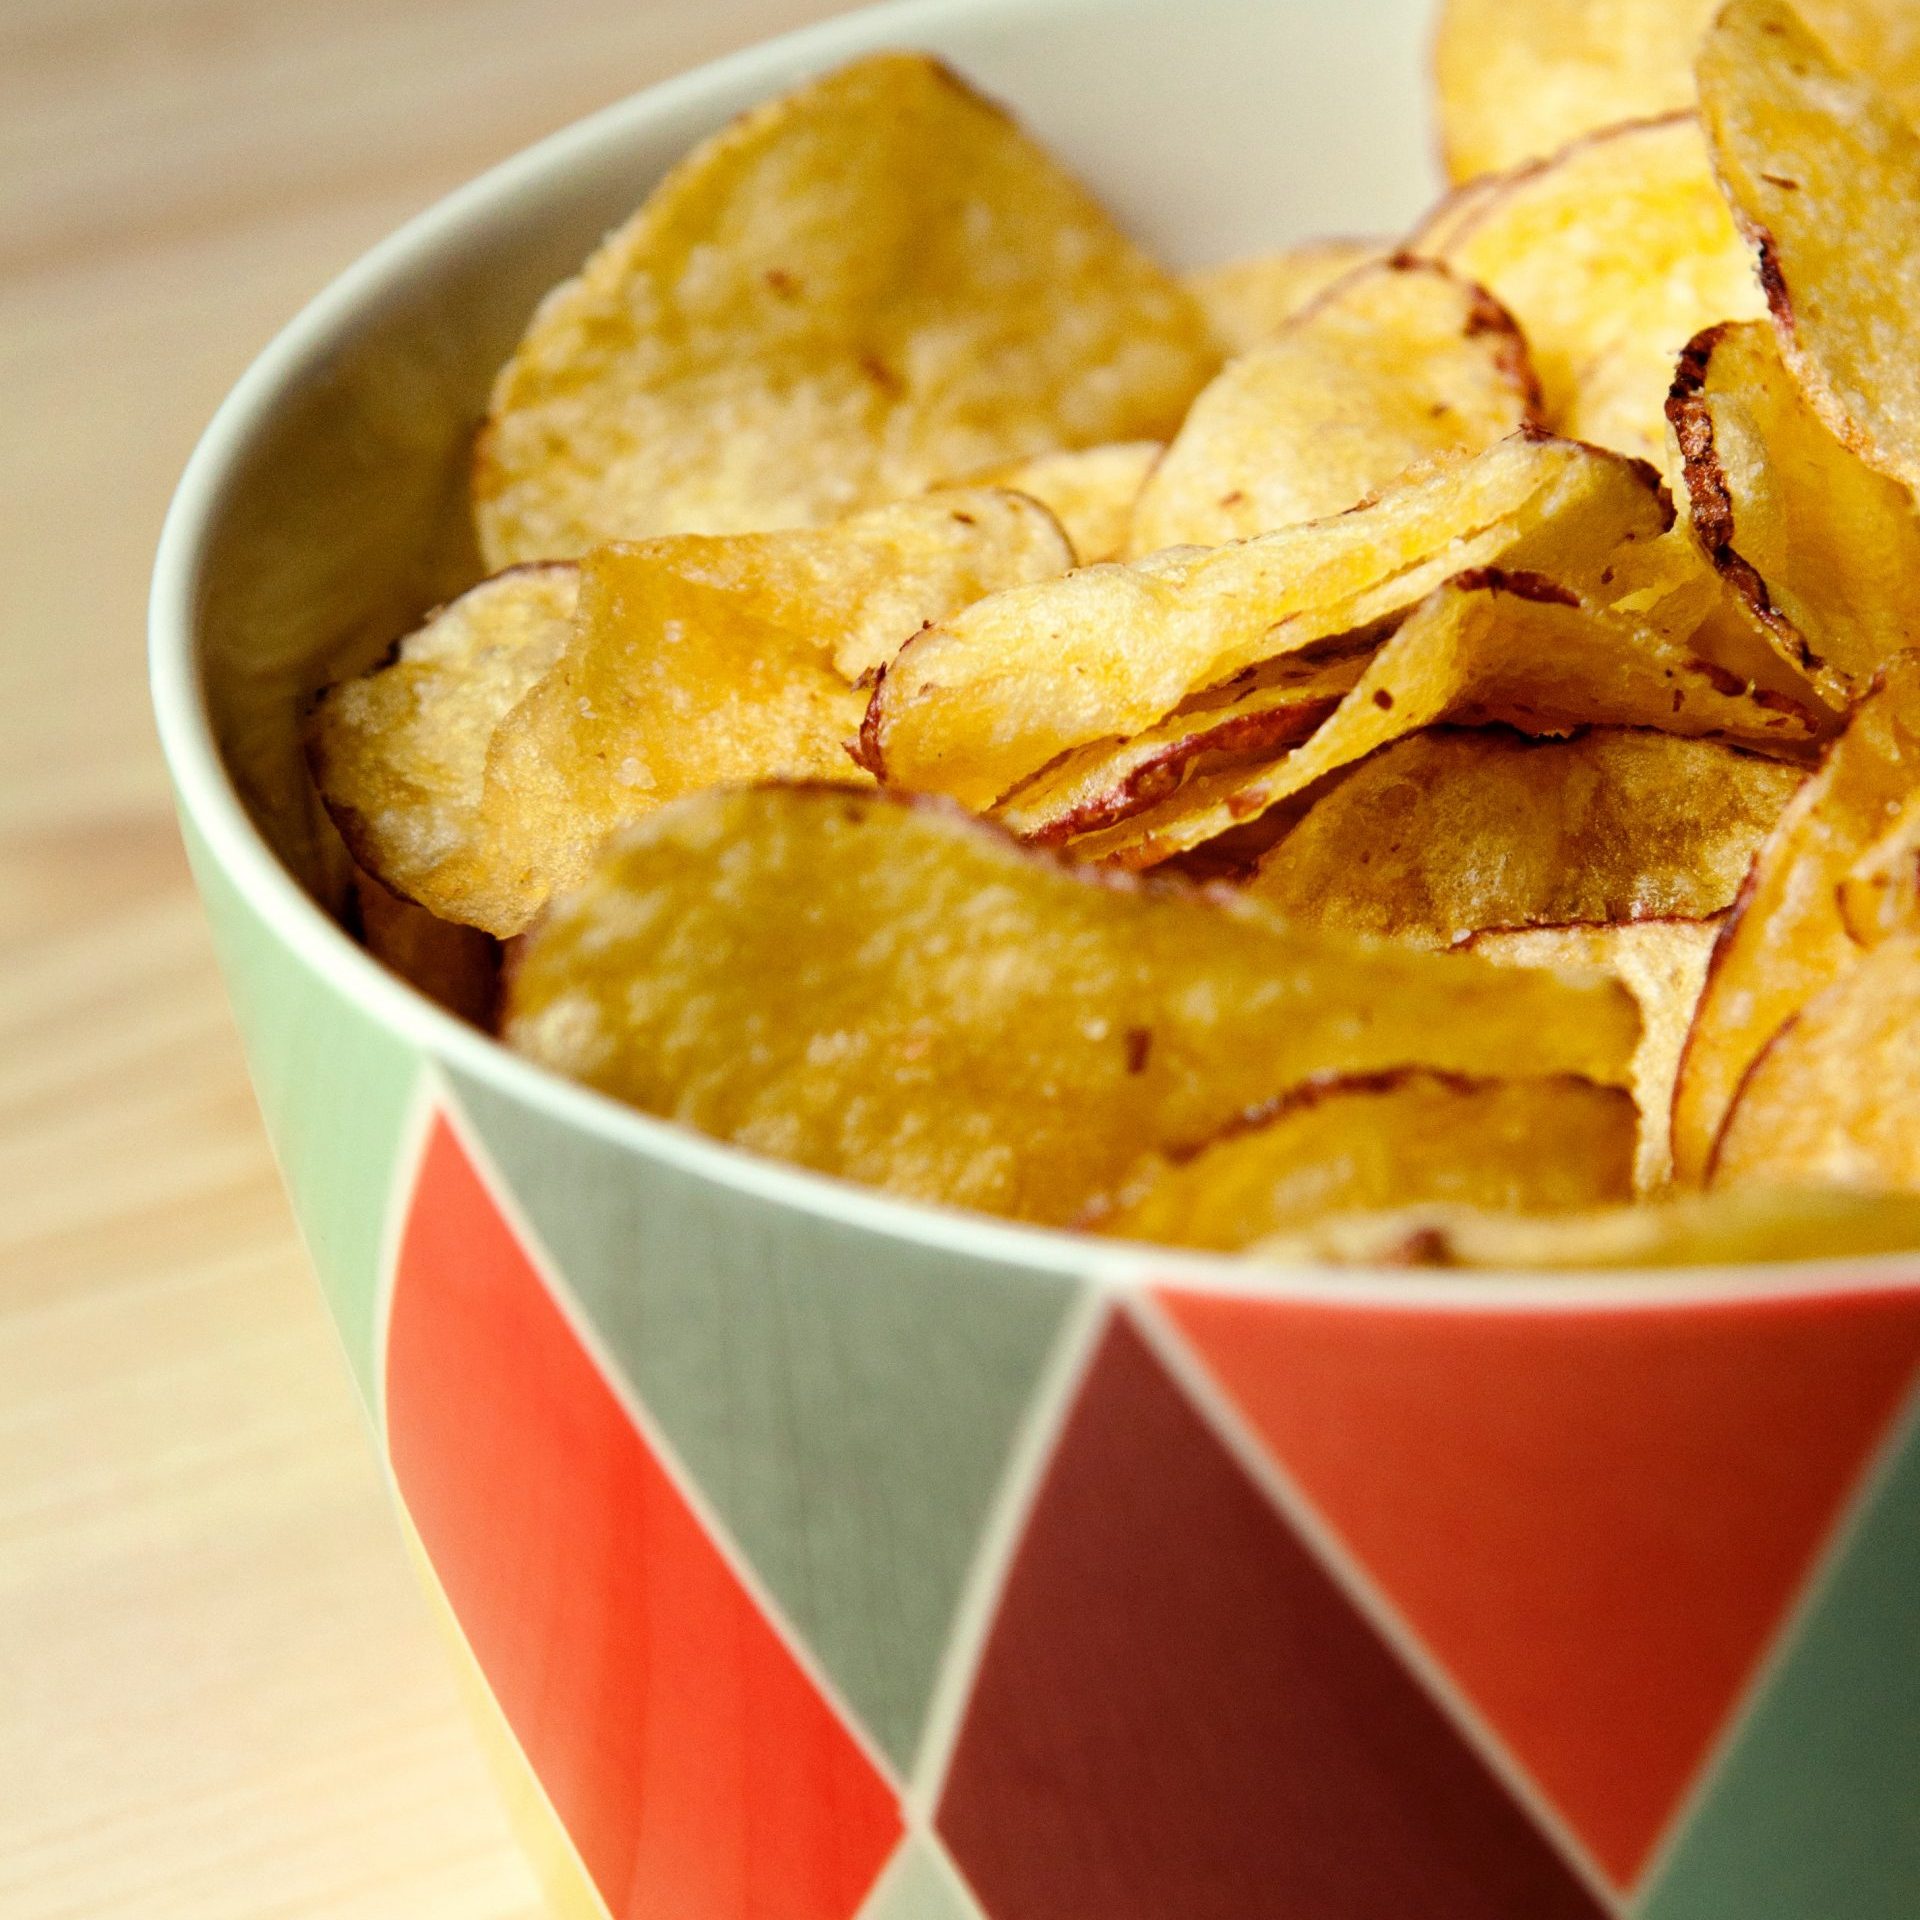 potato crisps chips in a colorful bowl on a wooden table